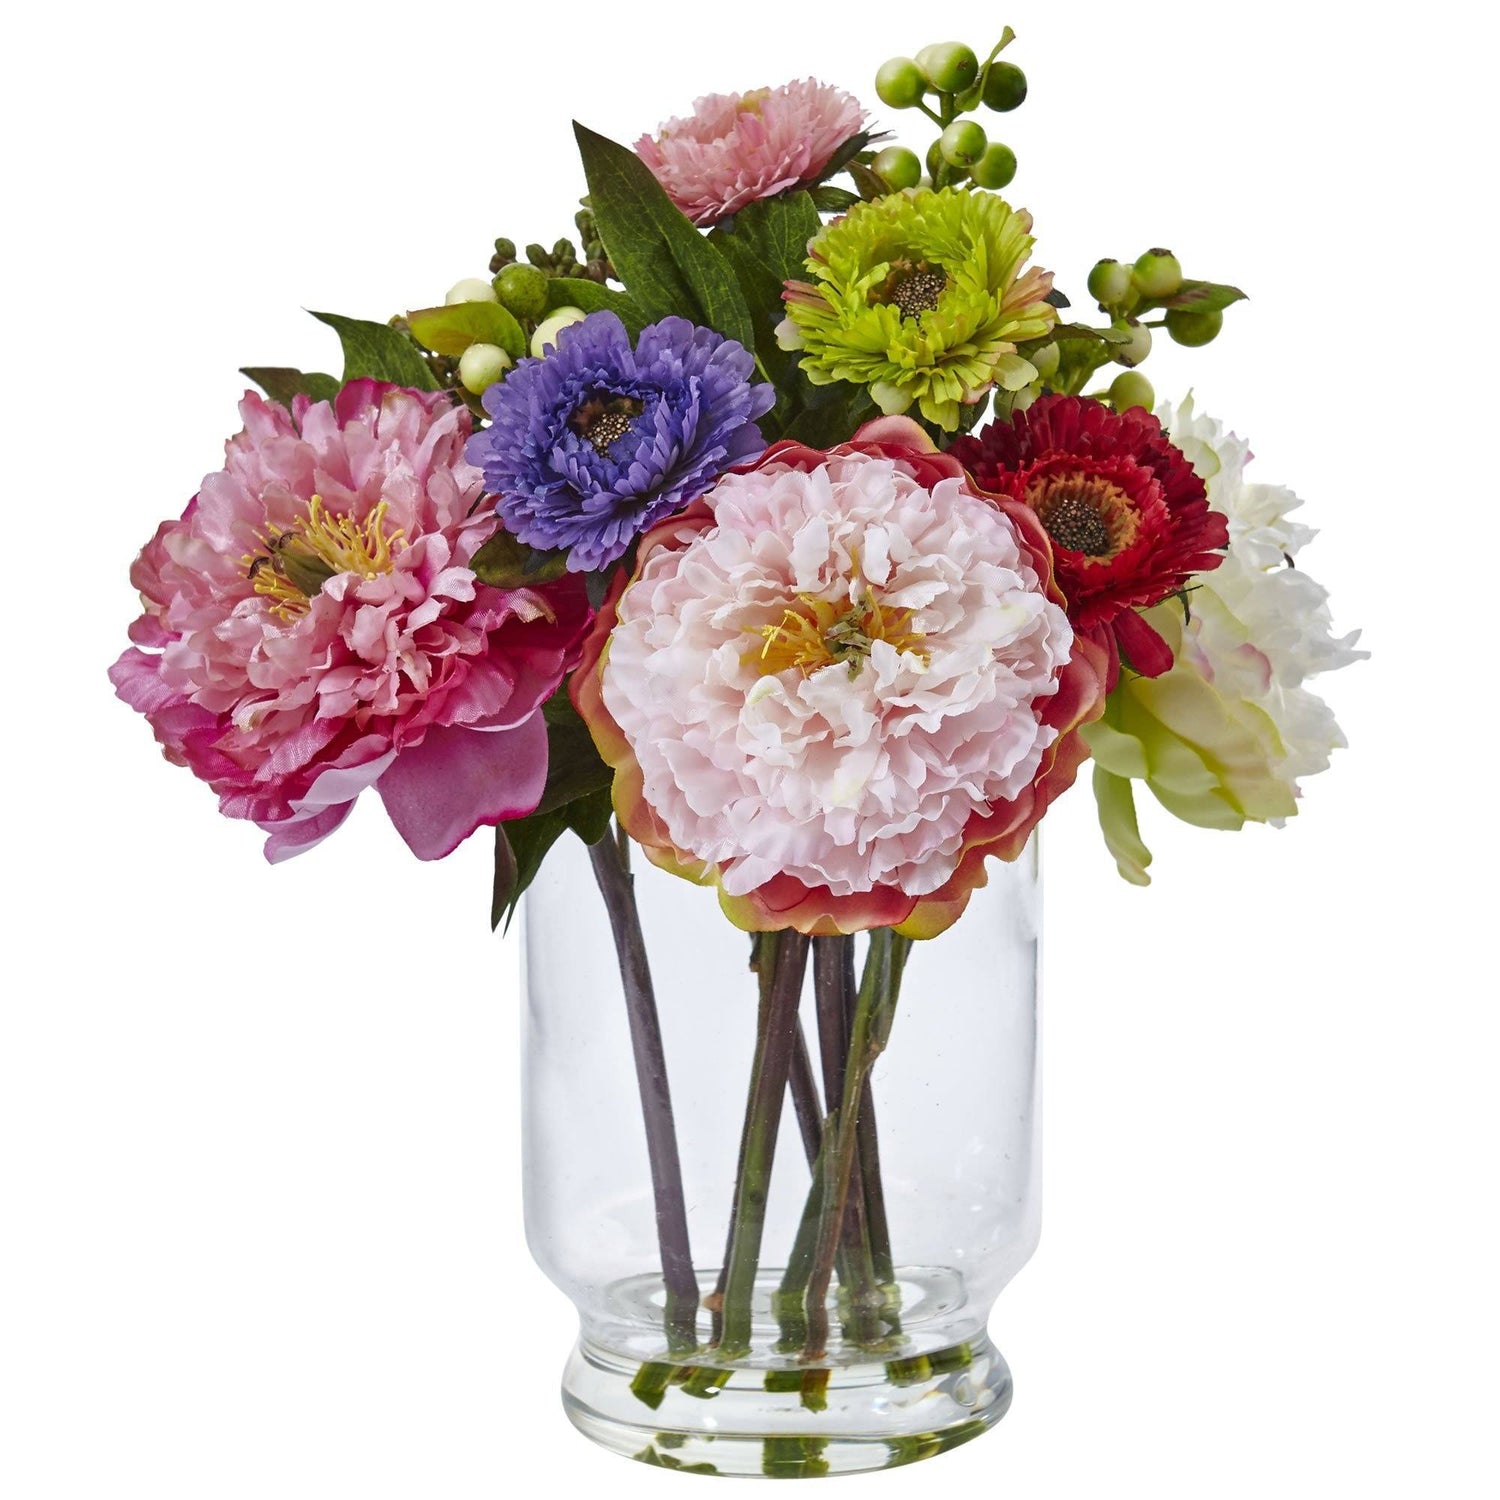 10.5" Artificial Peony and Mum in Glass Vase"